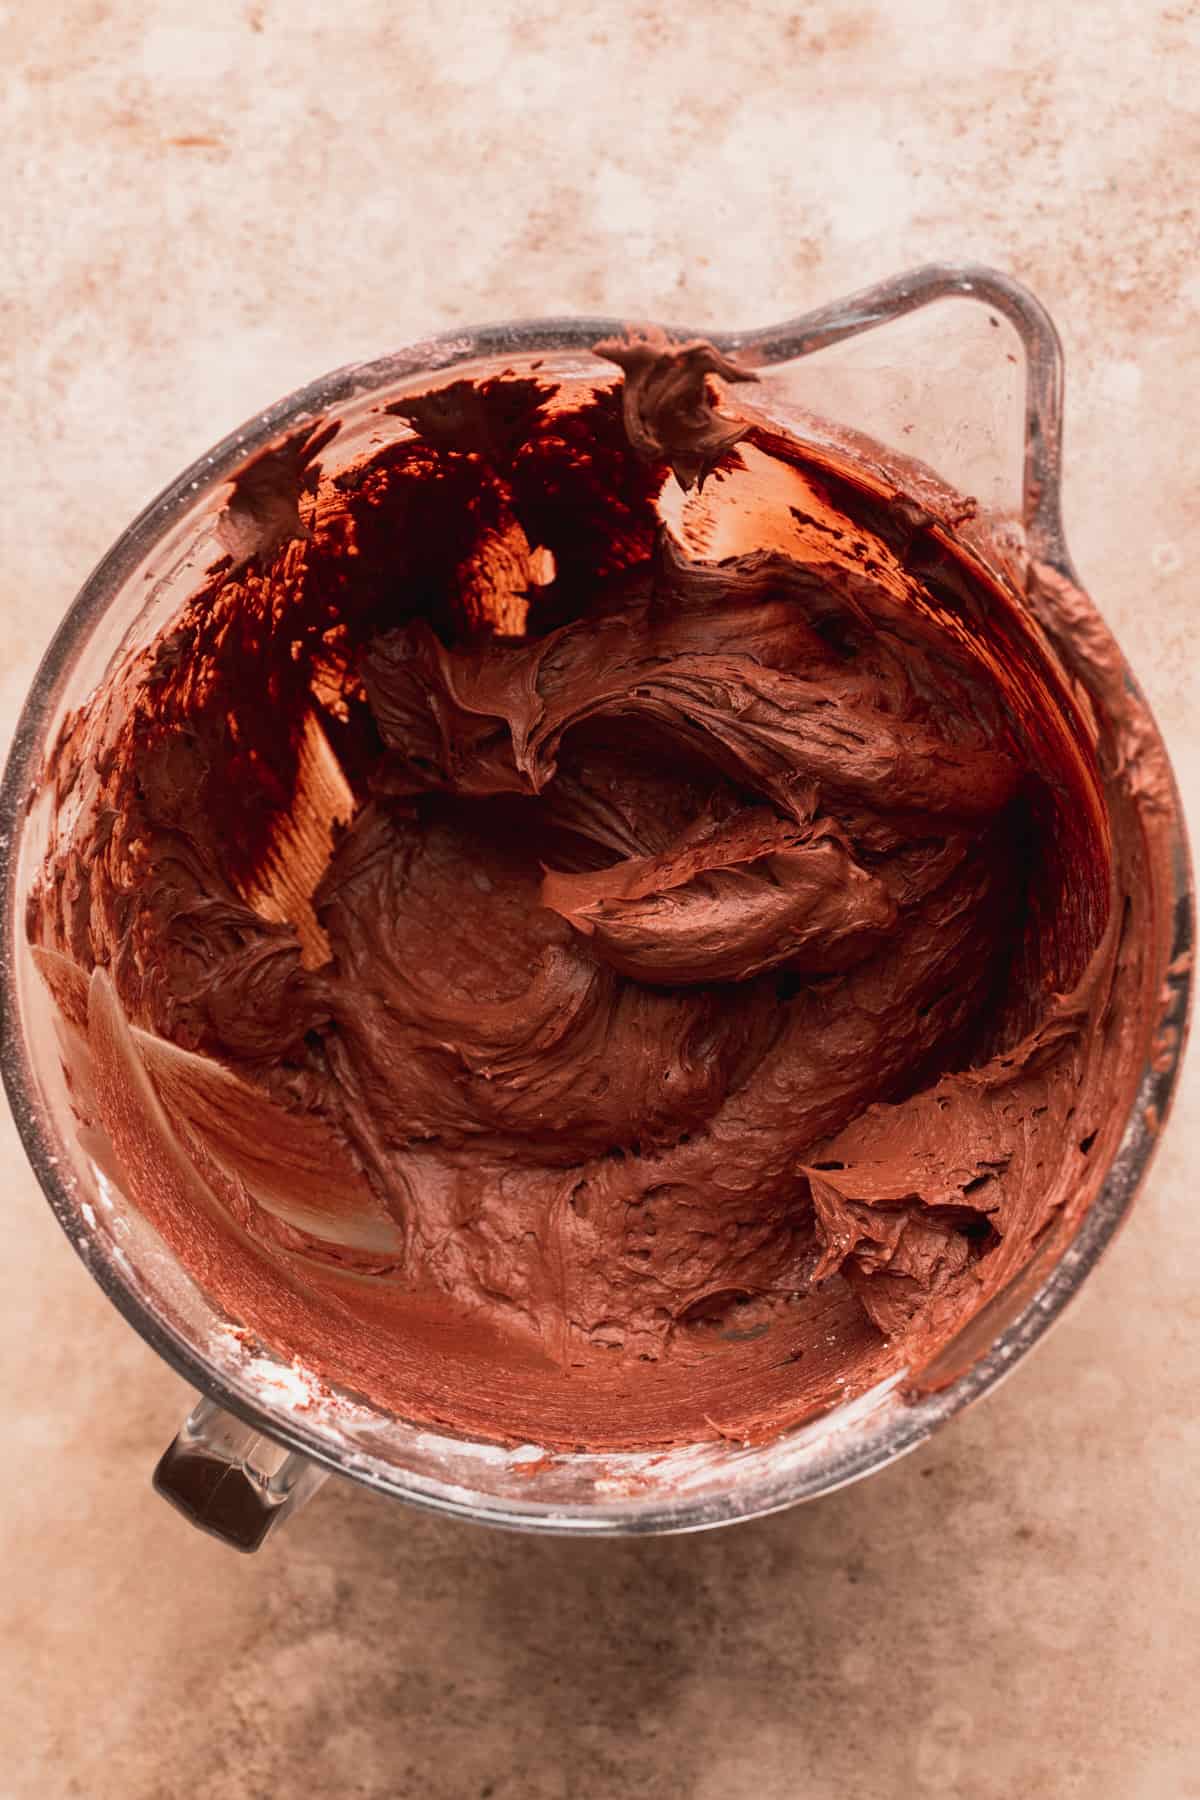 Chocolate frosting in a glass bowl.